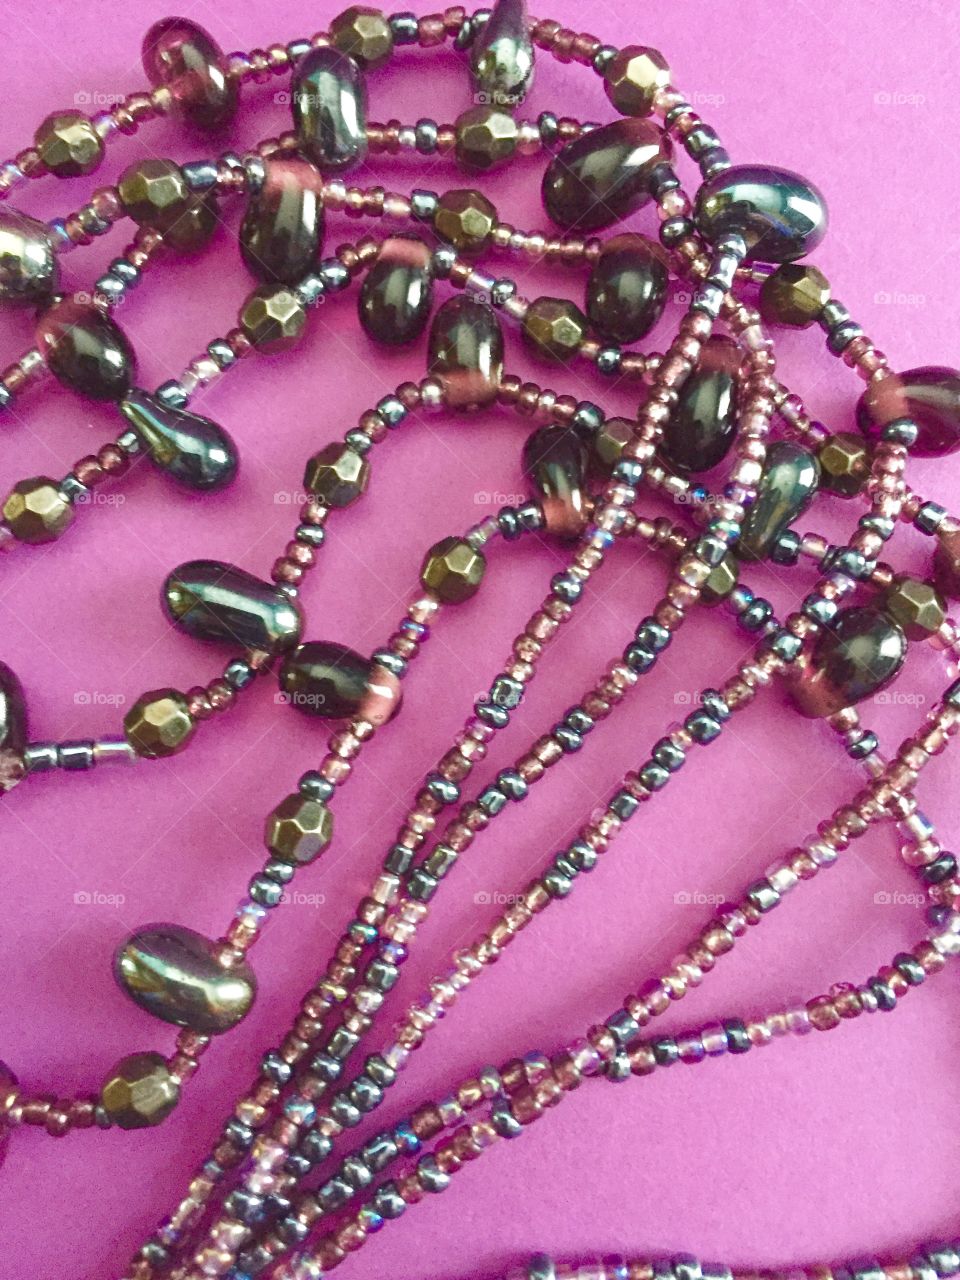 Beads necklace on pink background